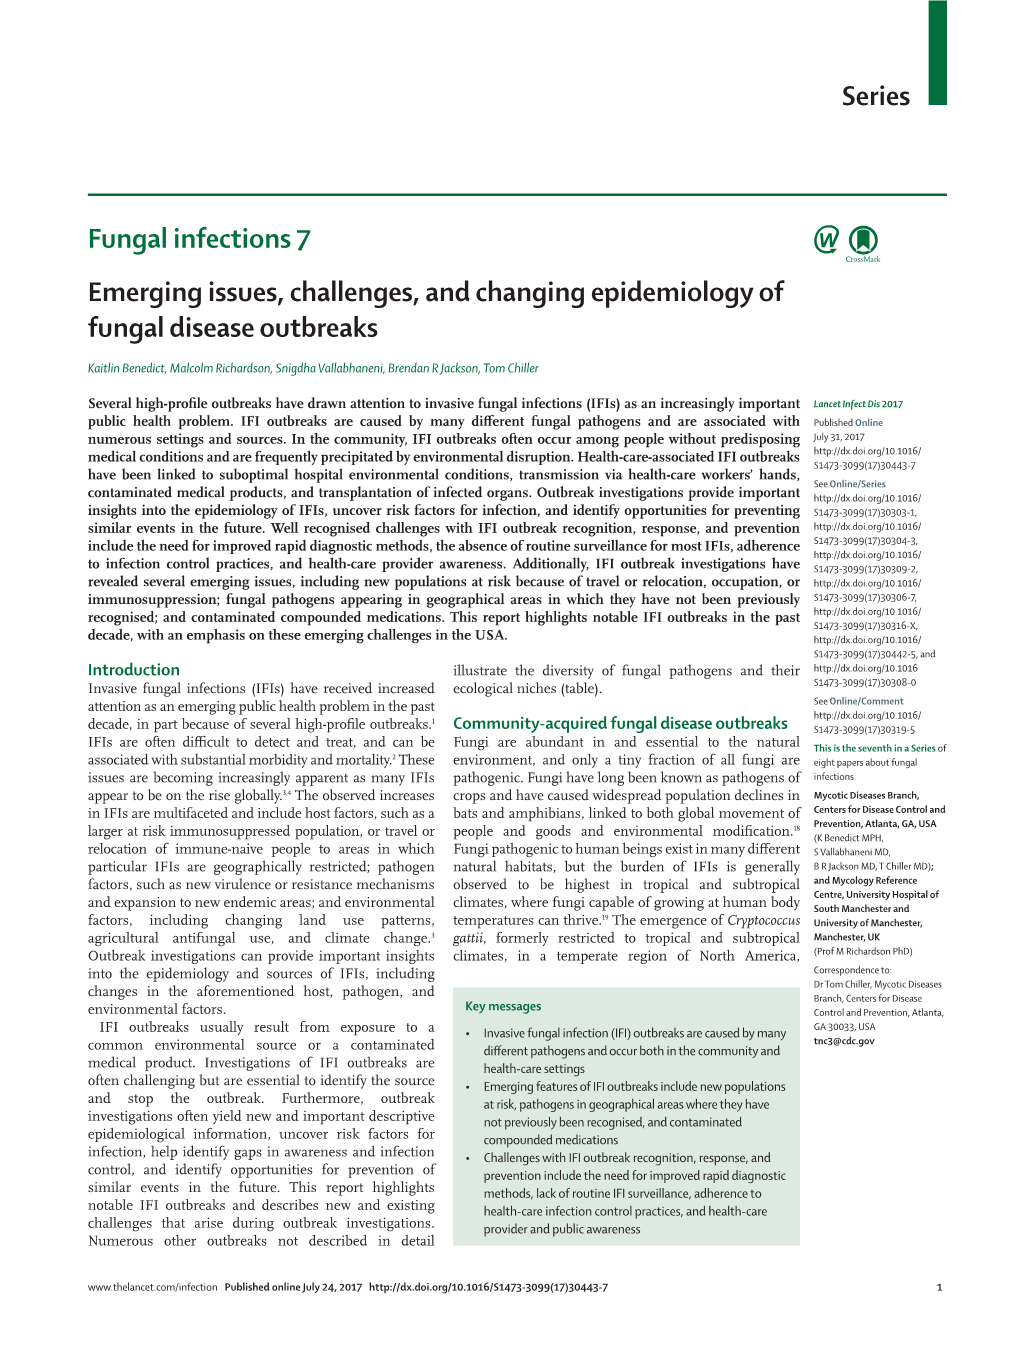 Series Fungal Infections 7 Emerging Issues, Challenges, and Changing